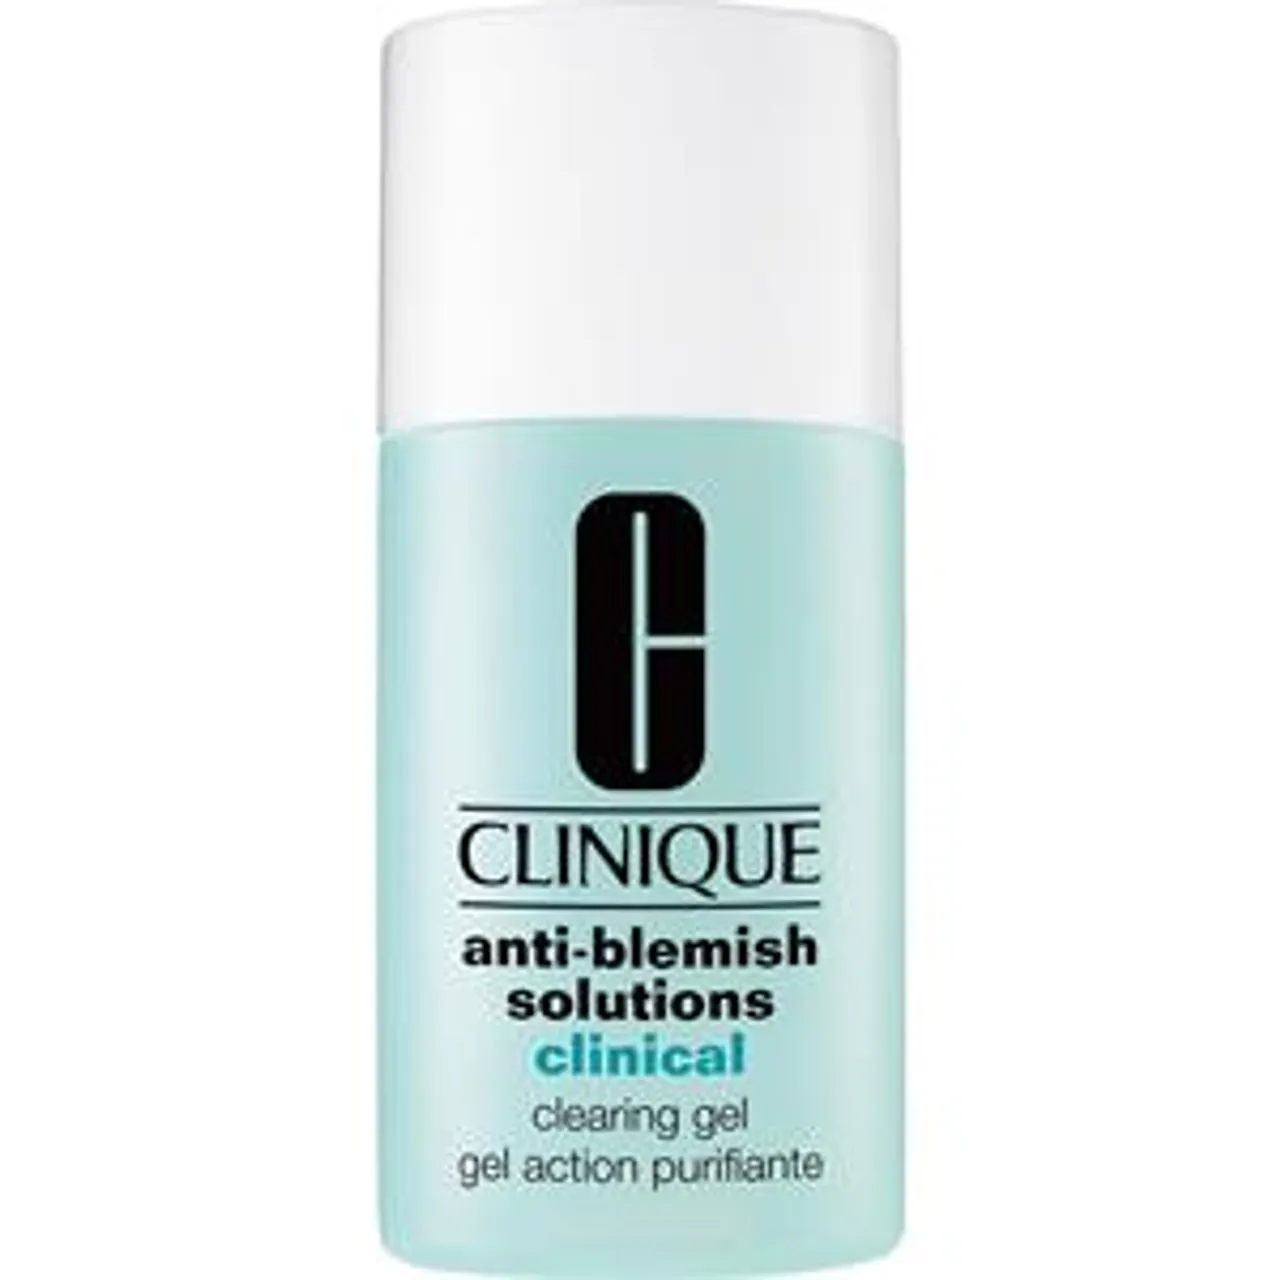 Clinique Anti-Blemish Solutions Clinical Clearing Gel Female 30 ml